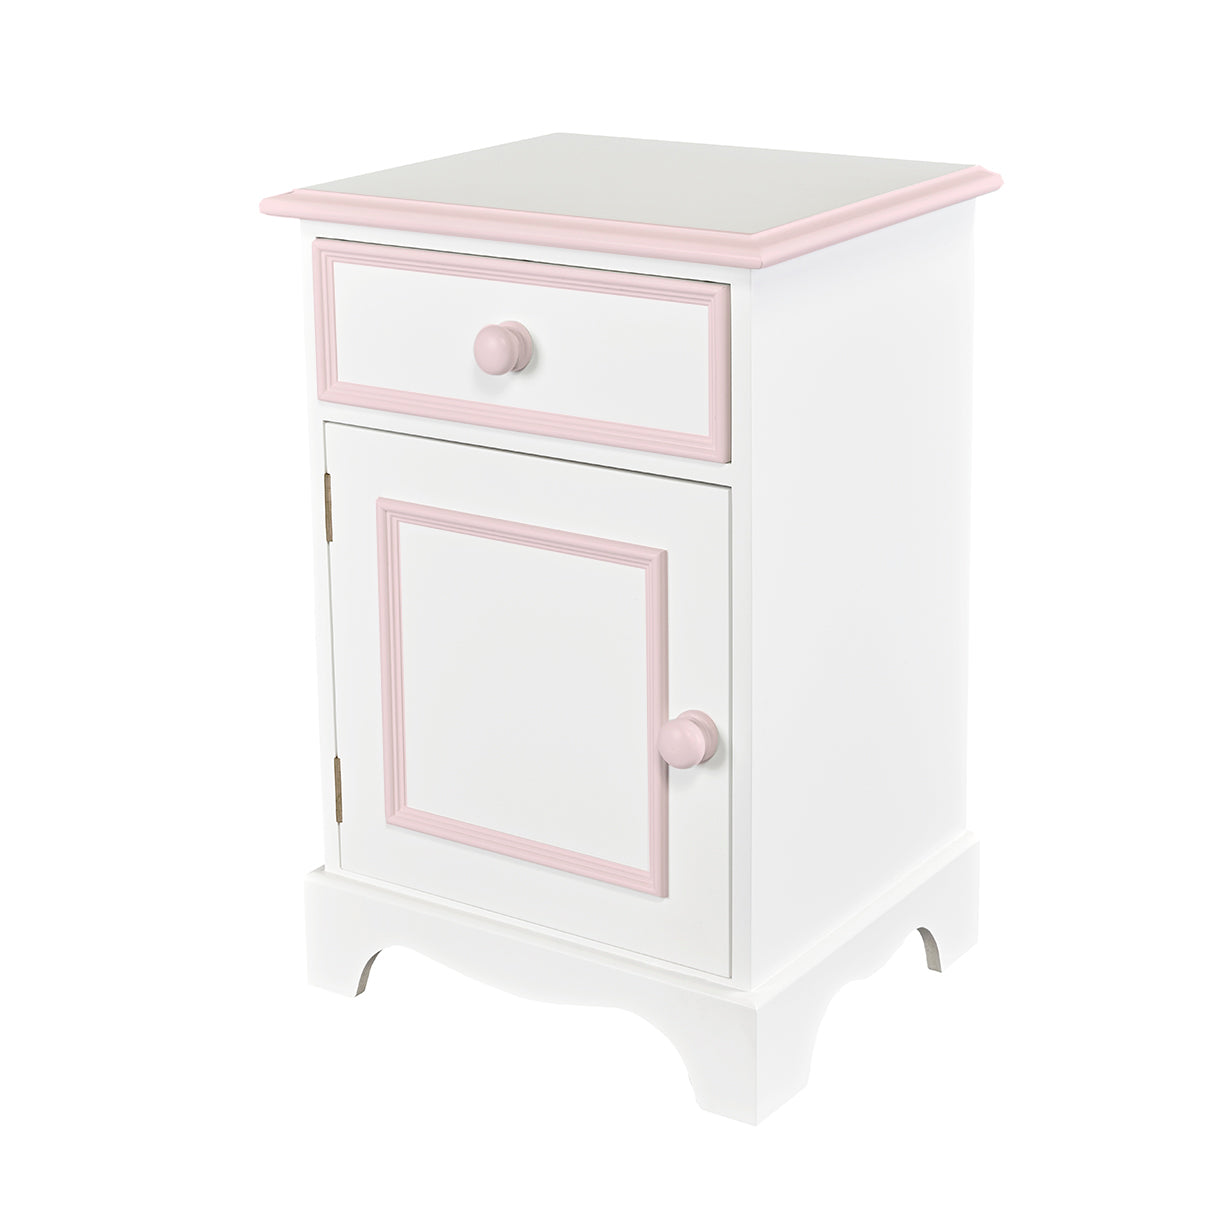 White and pink bedside table with drawer for kids room & nursery | Dragons of Walton Street